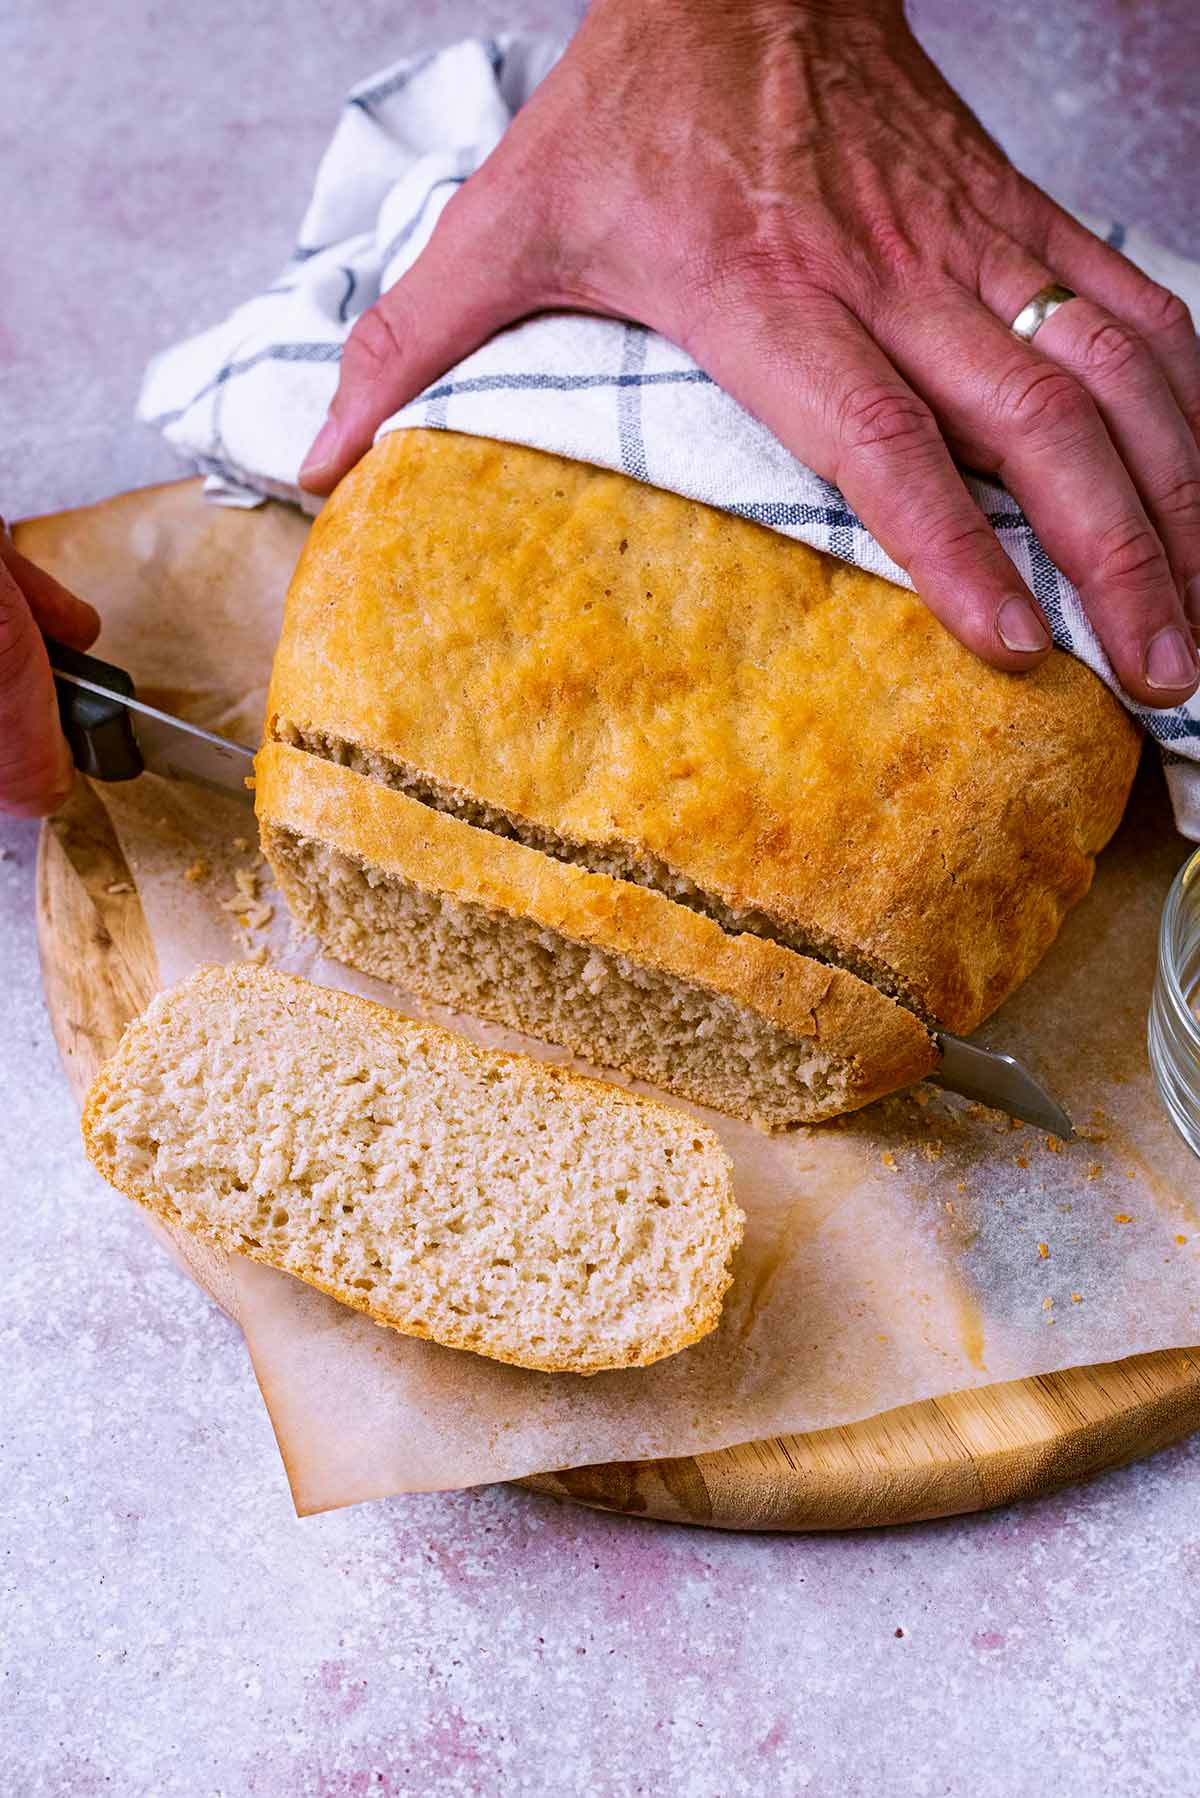 A loaf of bread being sliced by someone with a bread knife.